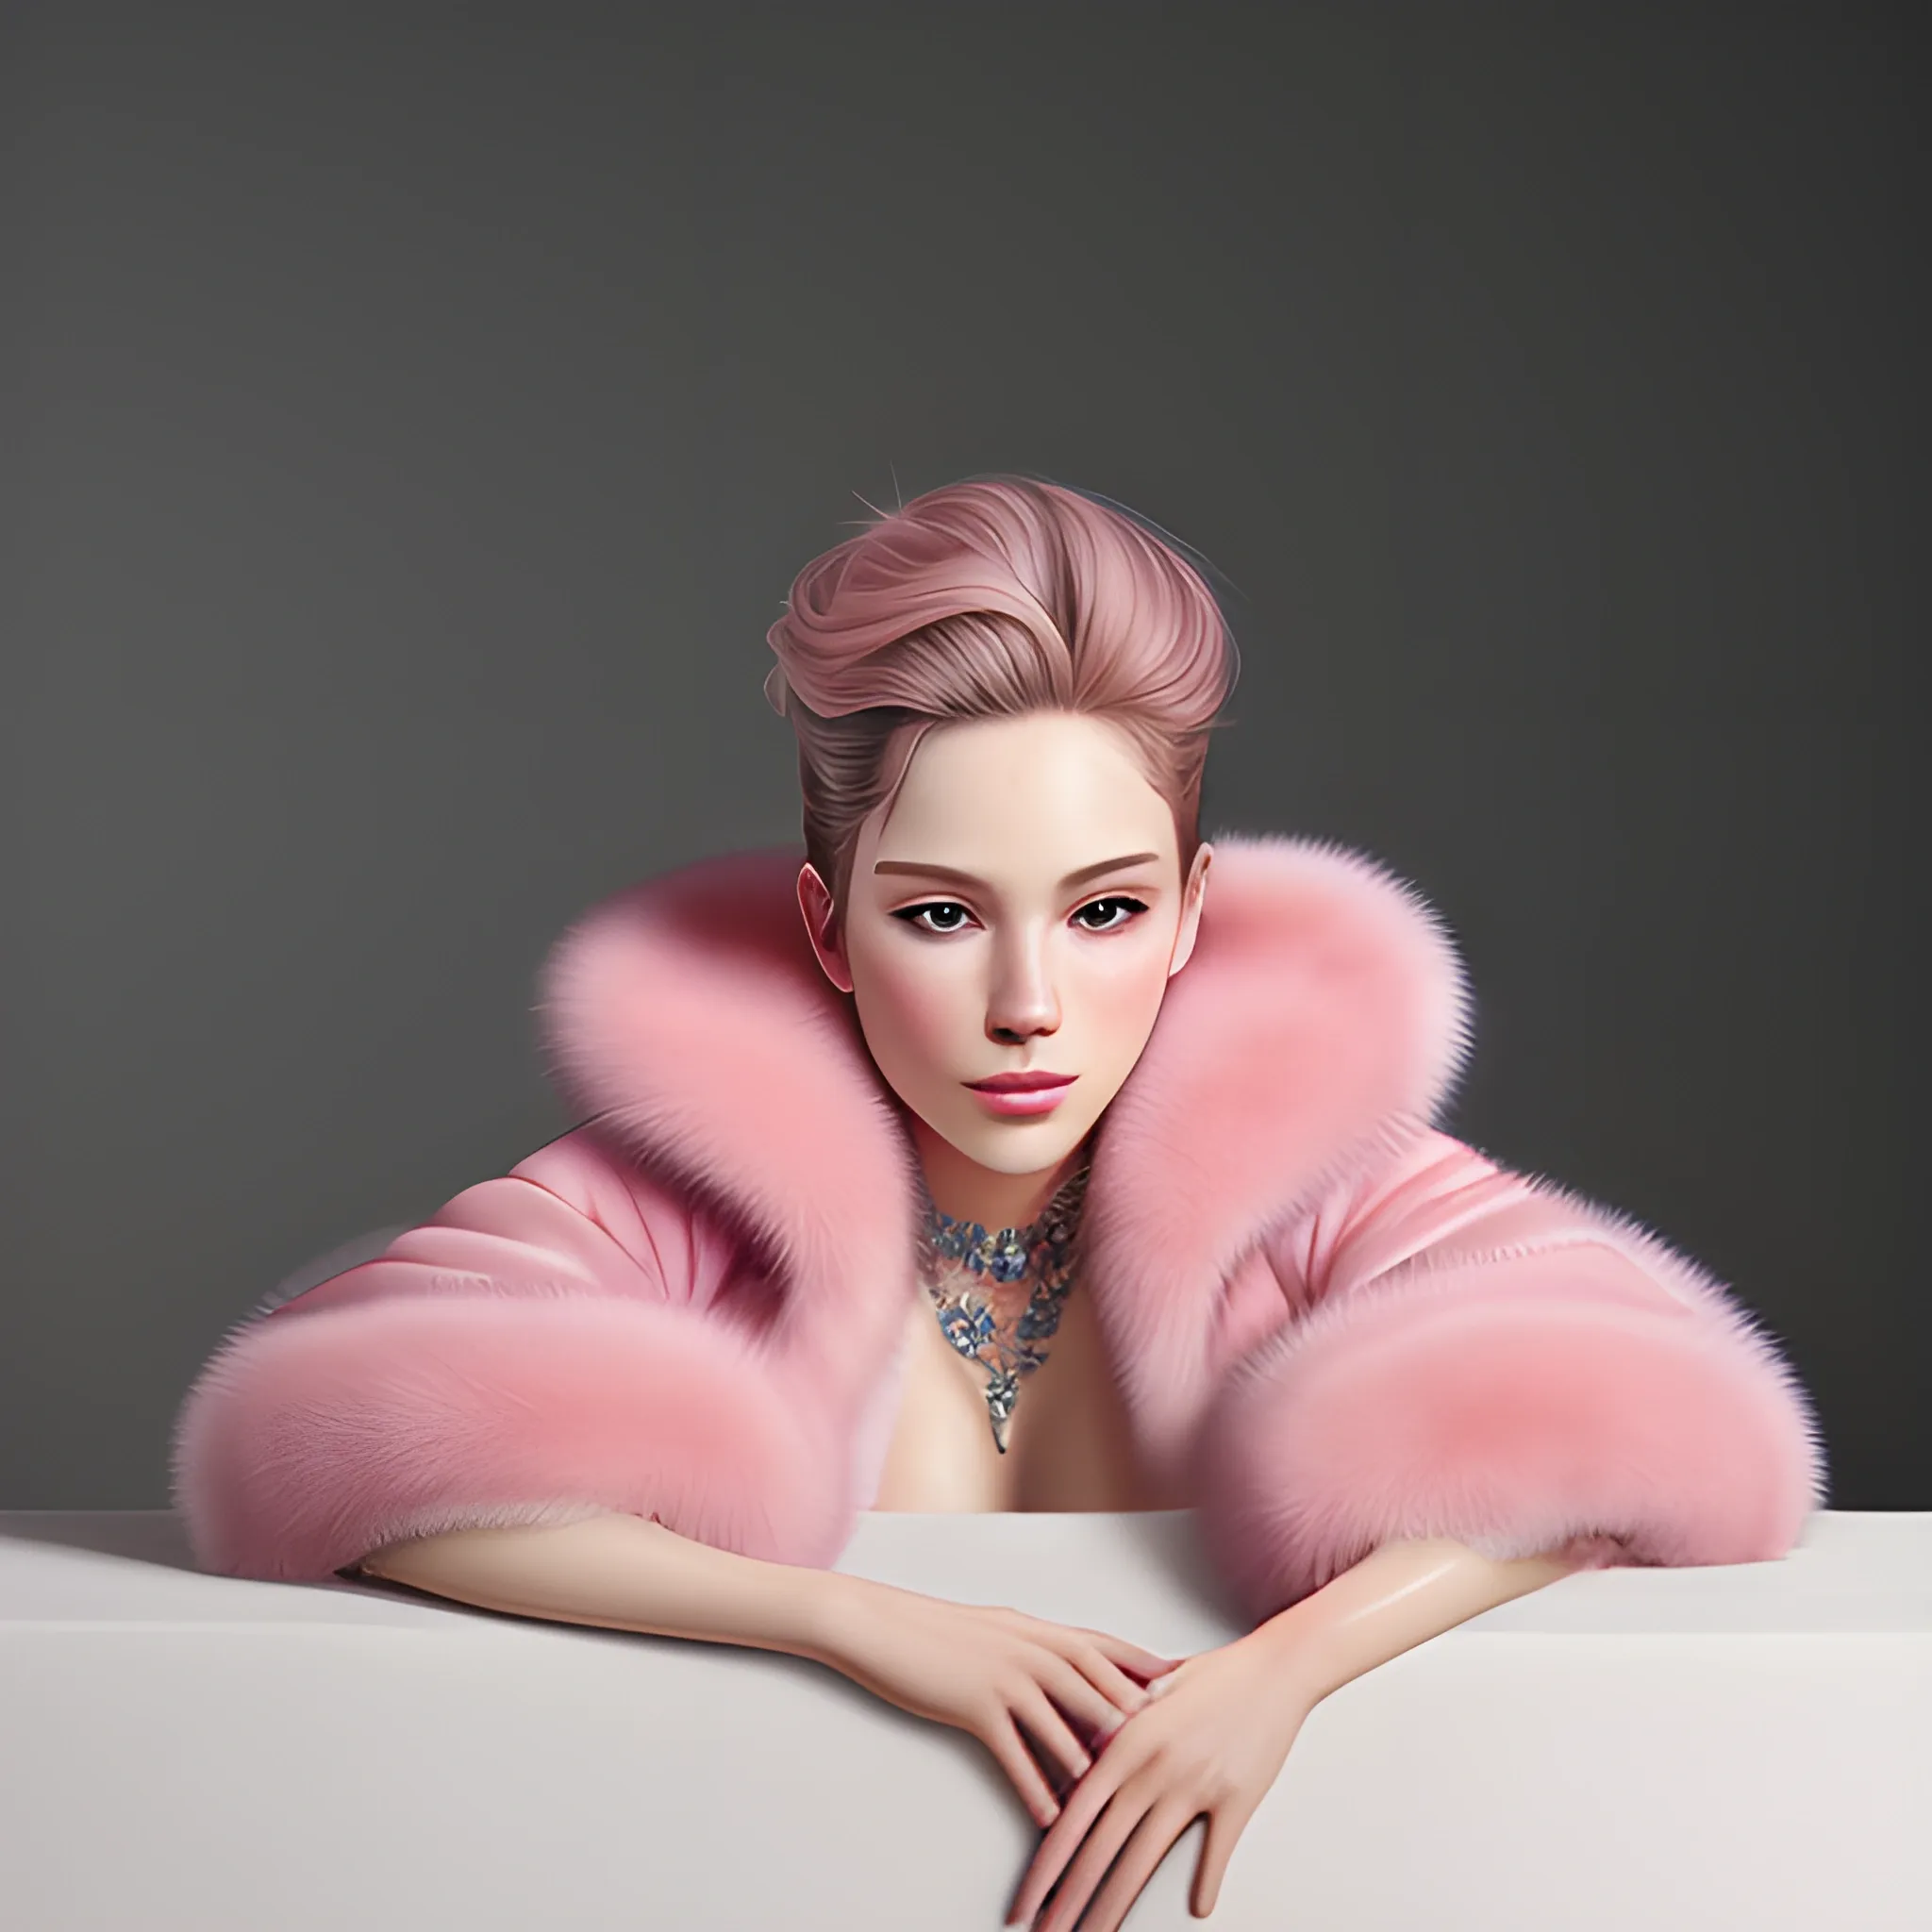 best quality, masterpiece, ultra high res, photorealistic, detailed skin, pink fur coat, lounging
